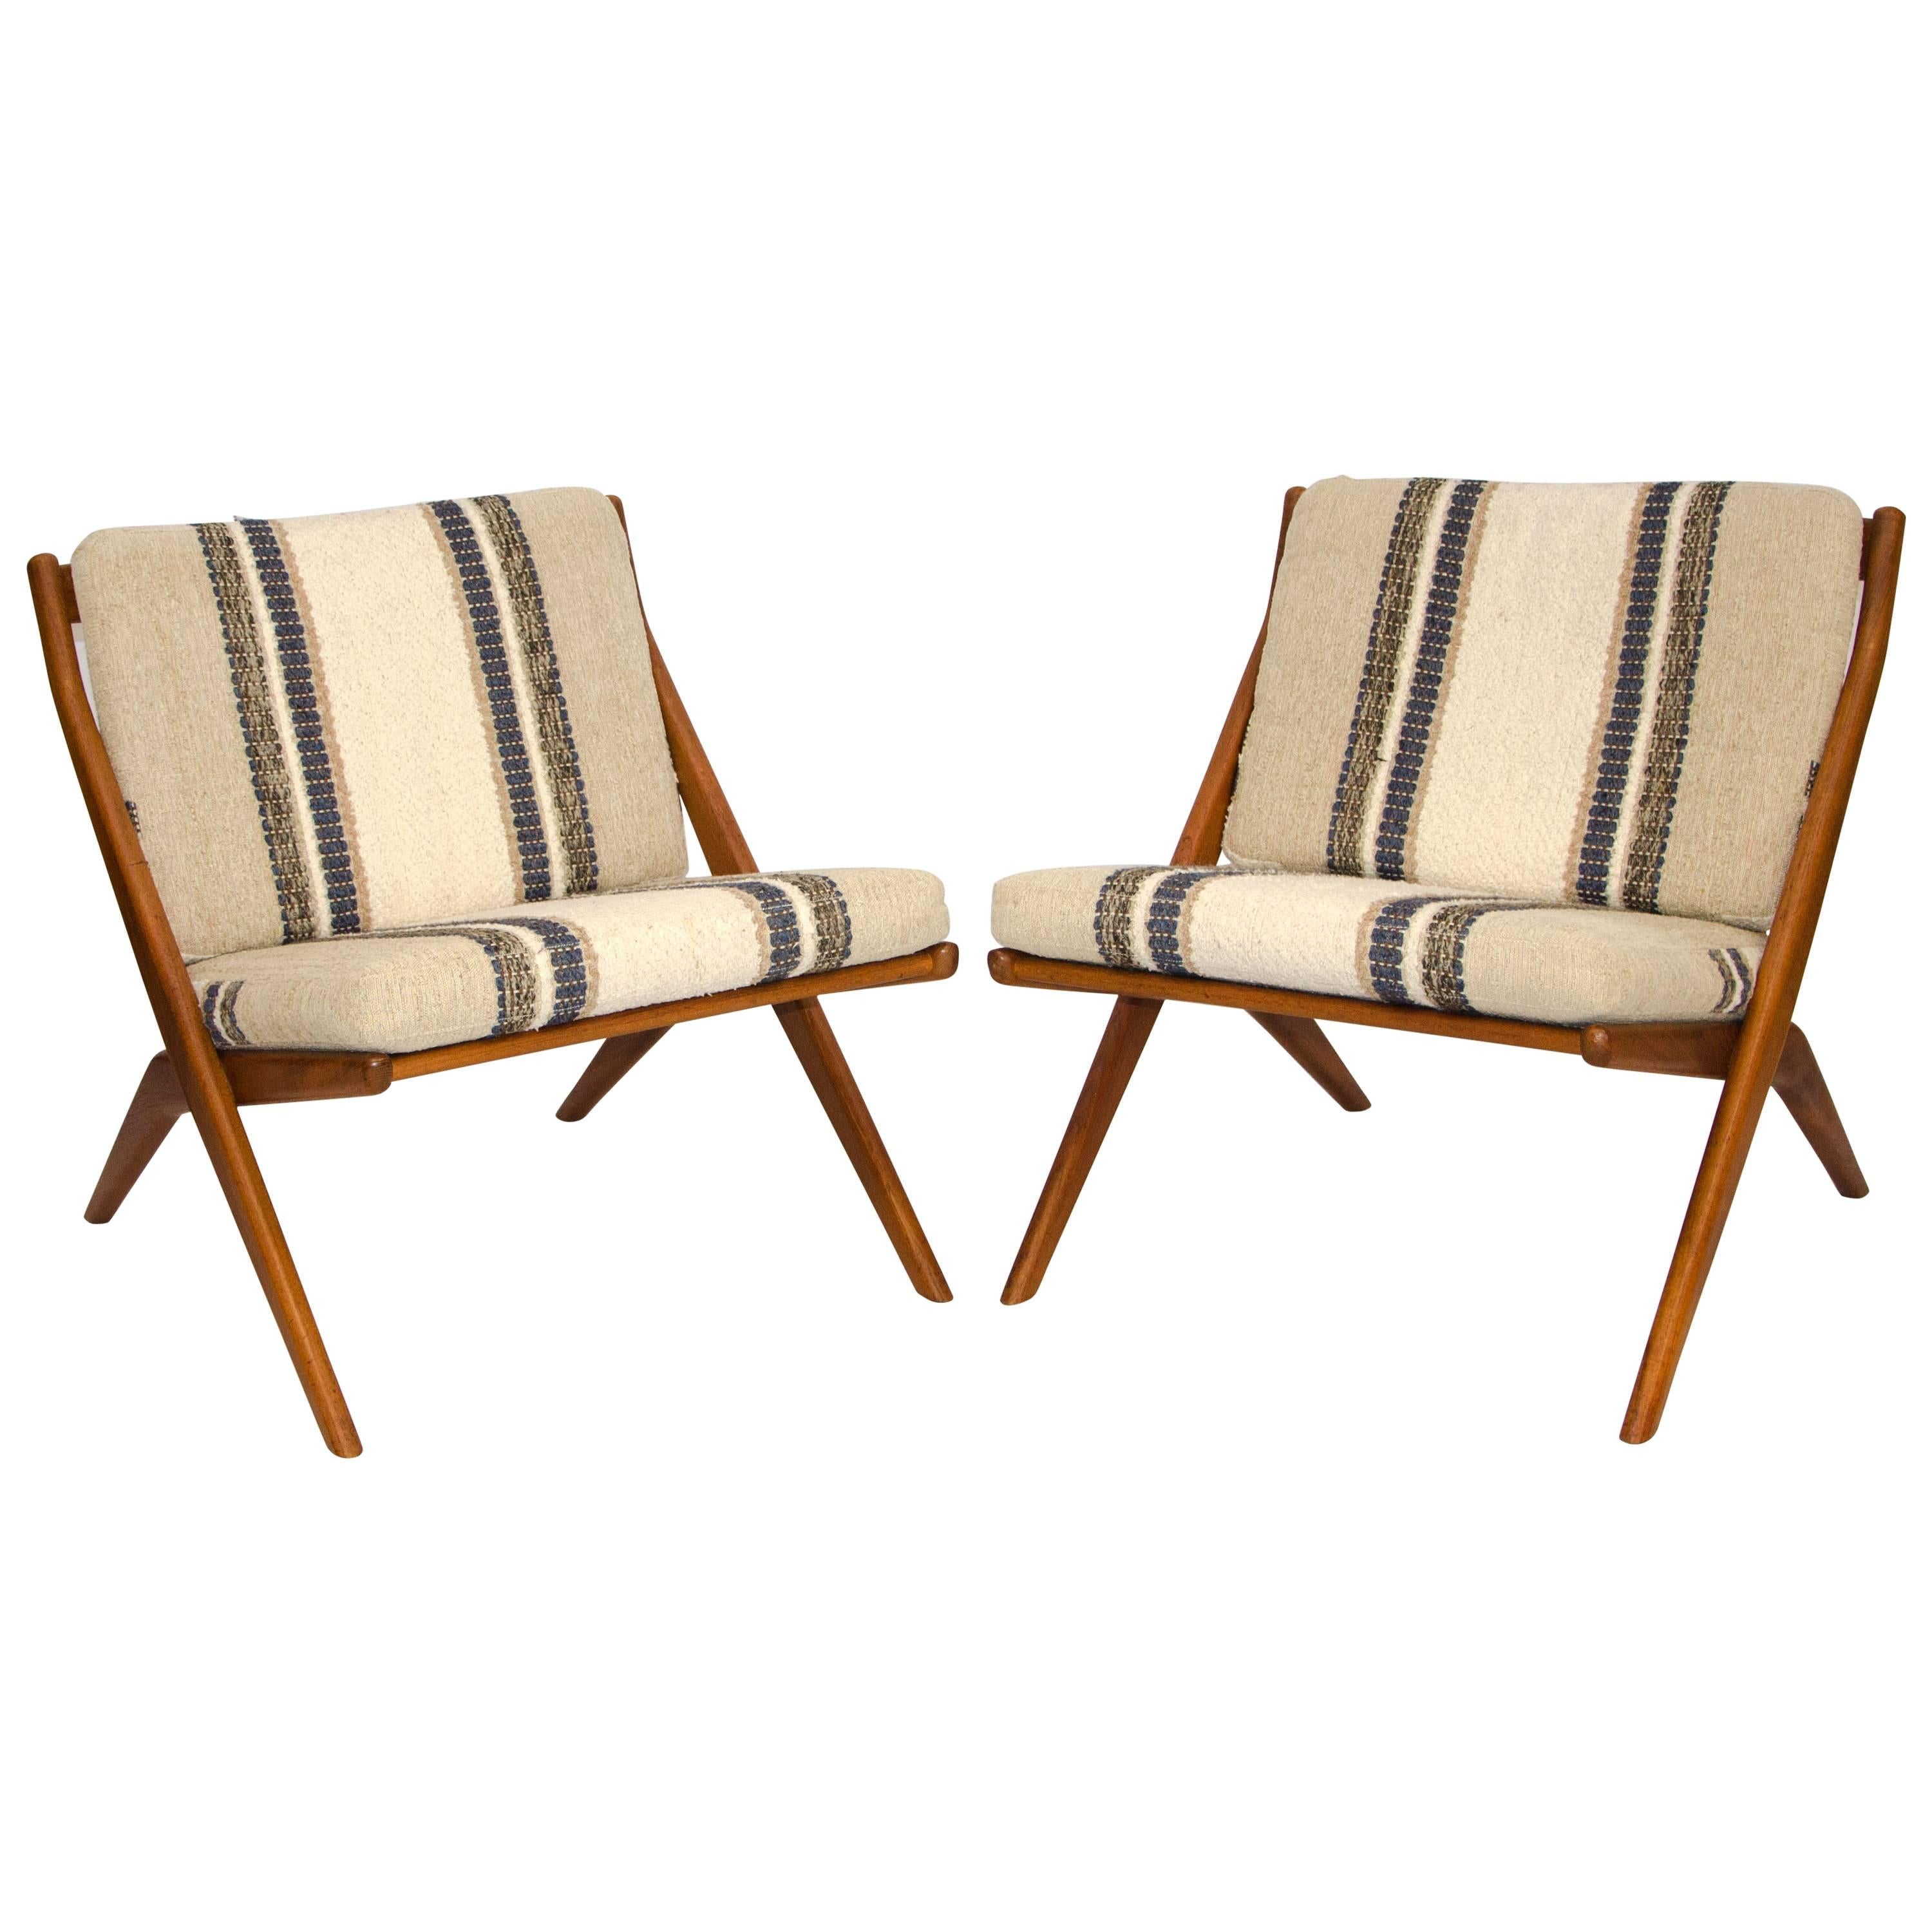 Pair of Teak "Scissor" Lounge Chairs by Folke Ohlsson for DUX